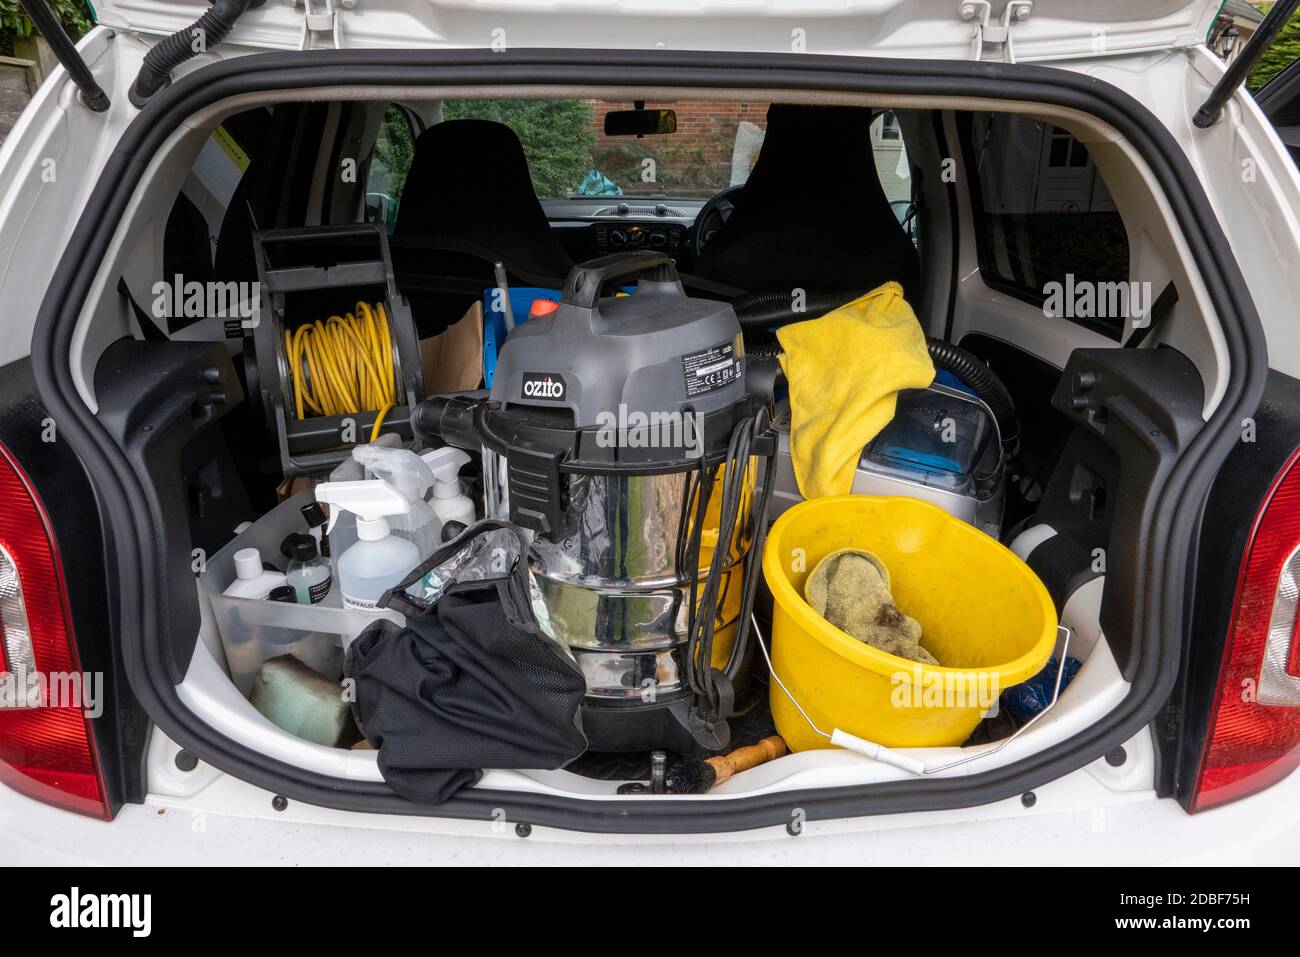 England, UK. 2020. Boot of a small van containing materials used to operate a car cleaning business Stock Photo